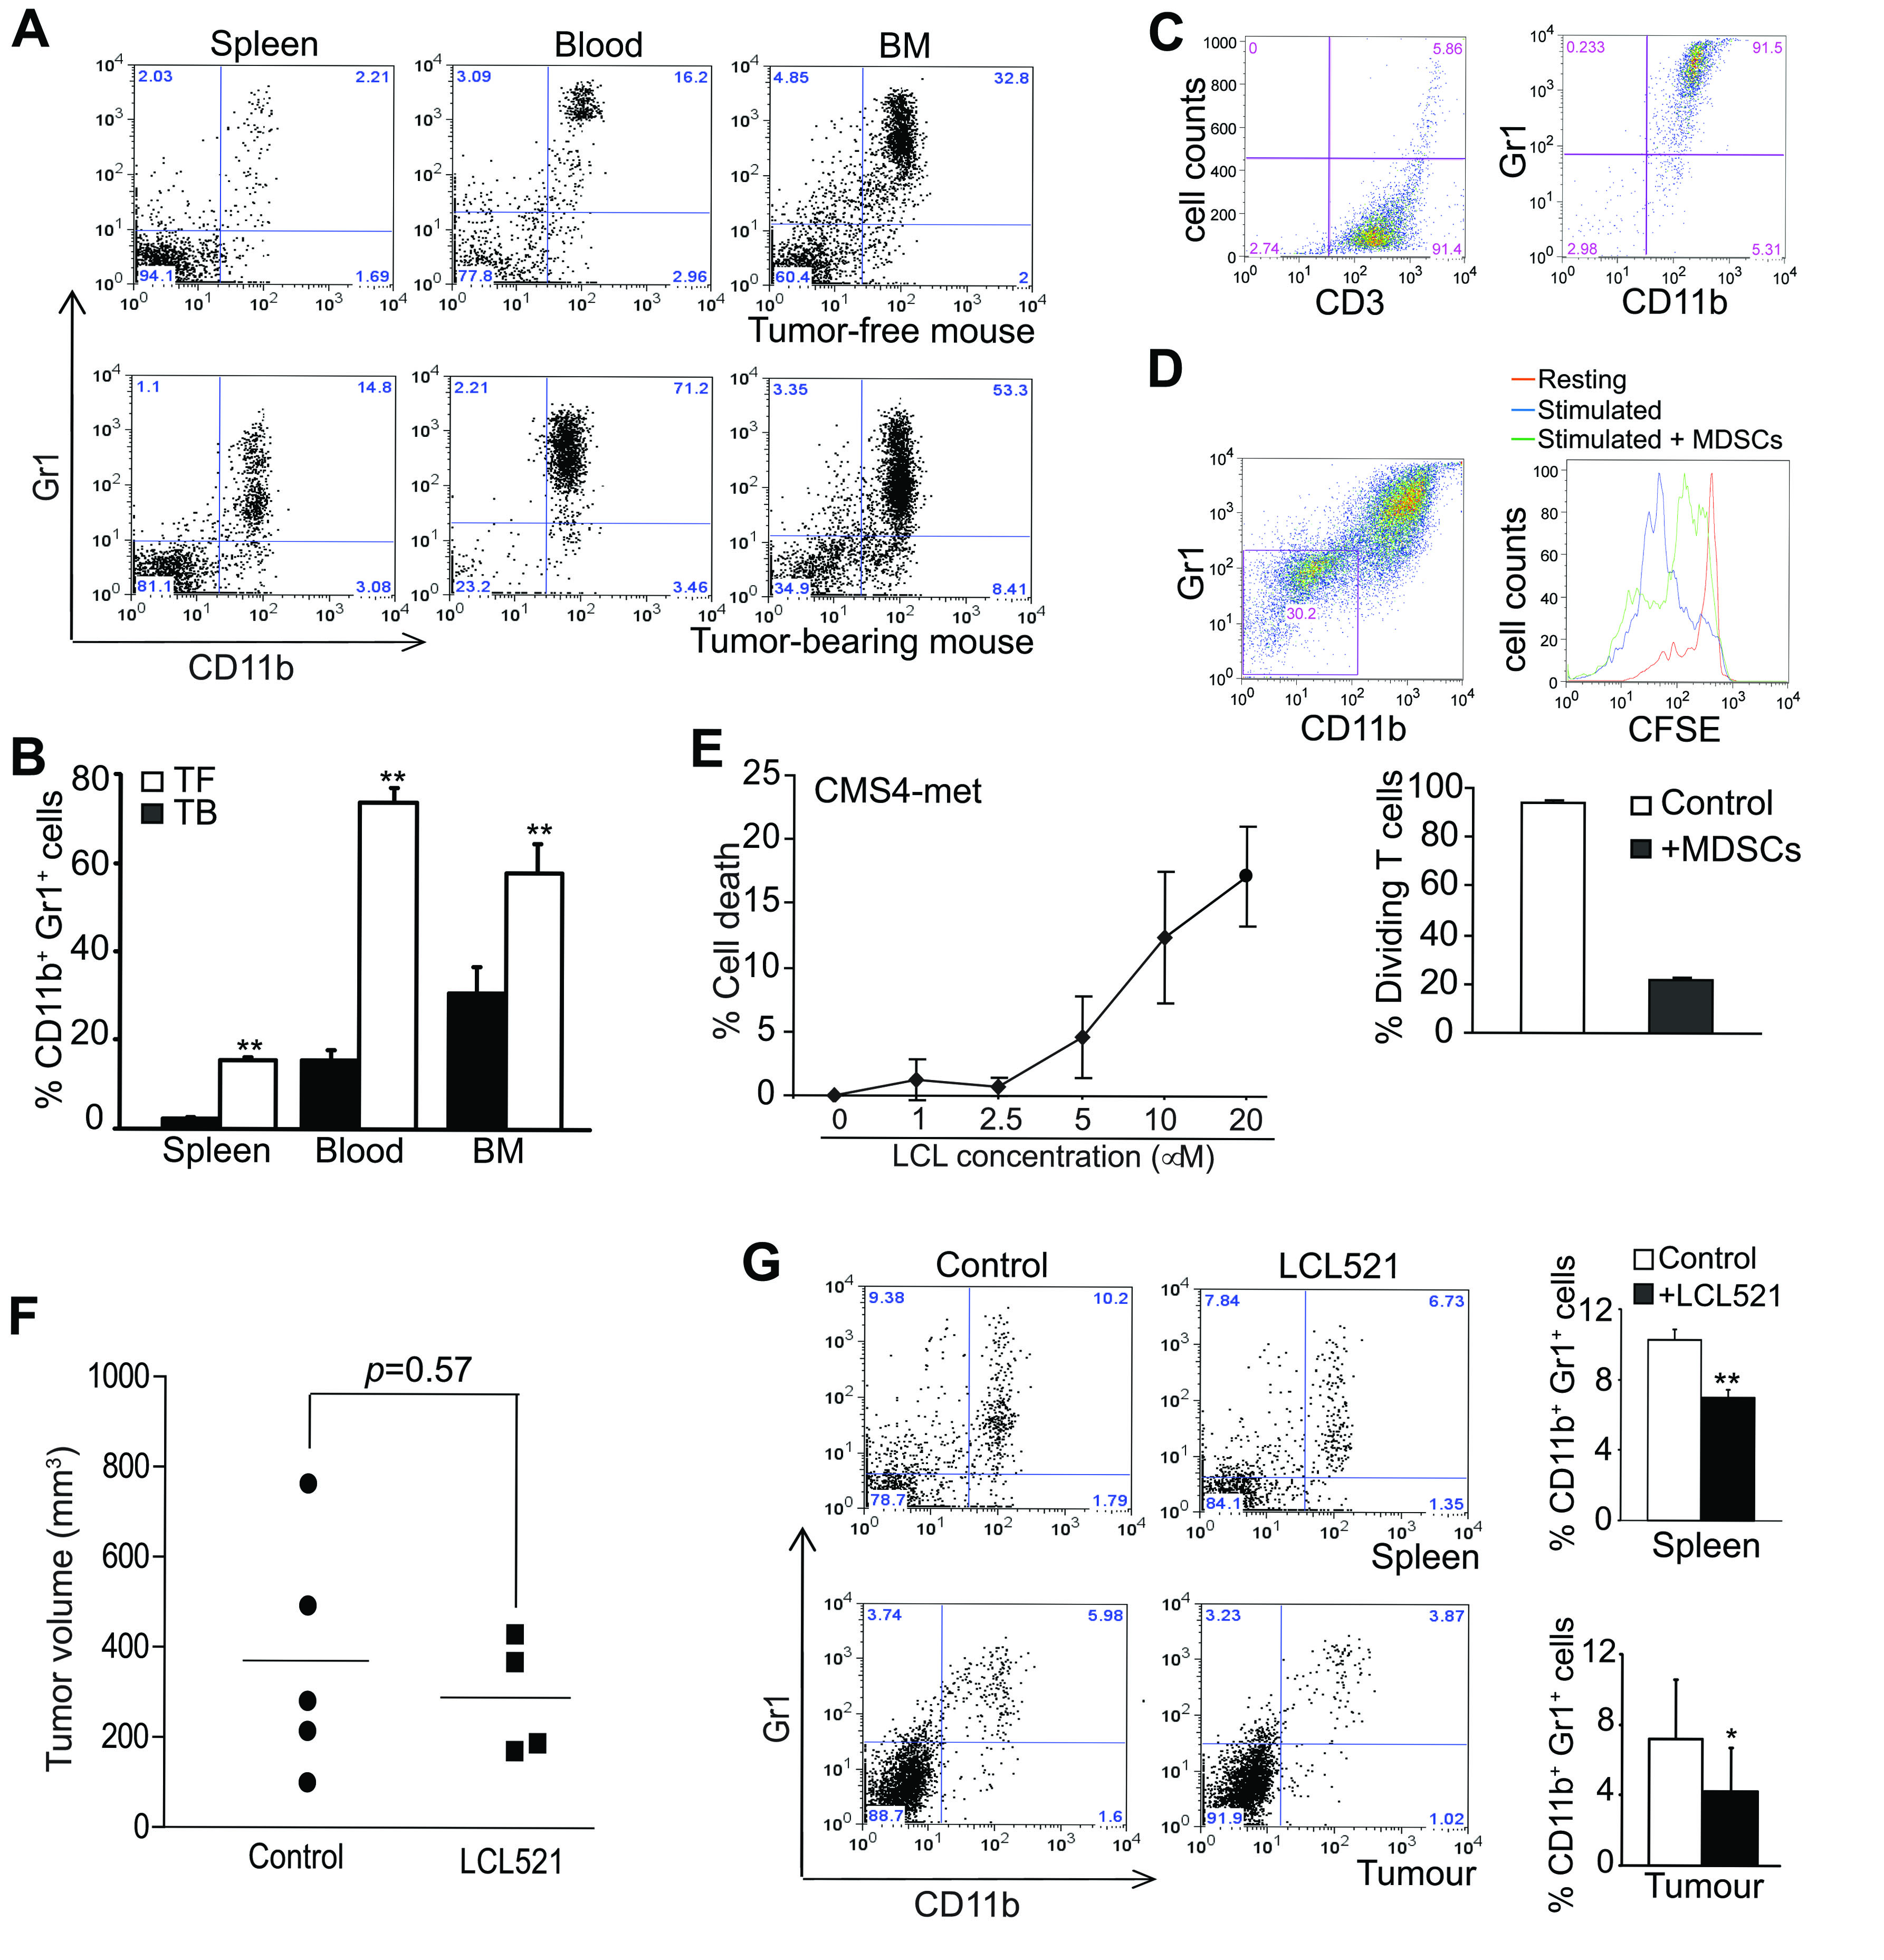 LCL521 suppresses MDSC accumulation in tumor-bearing mice in vivo.